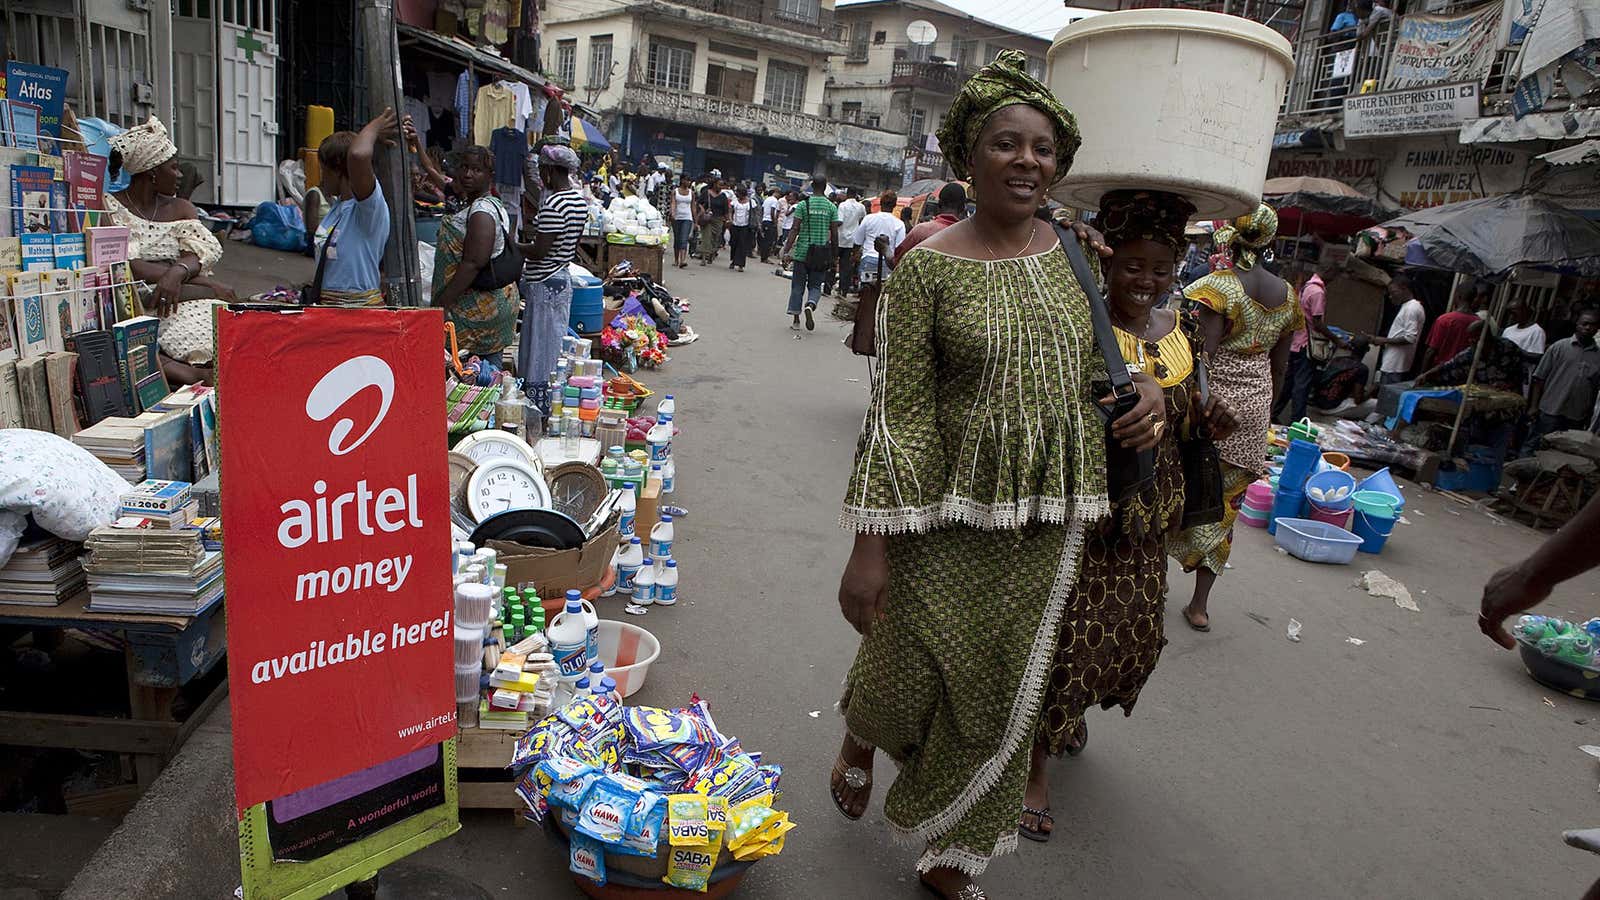 A woman walks past a sign advertising the mobile banking service Airtel Money in Freetown.